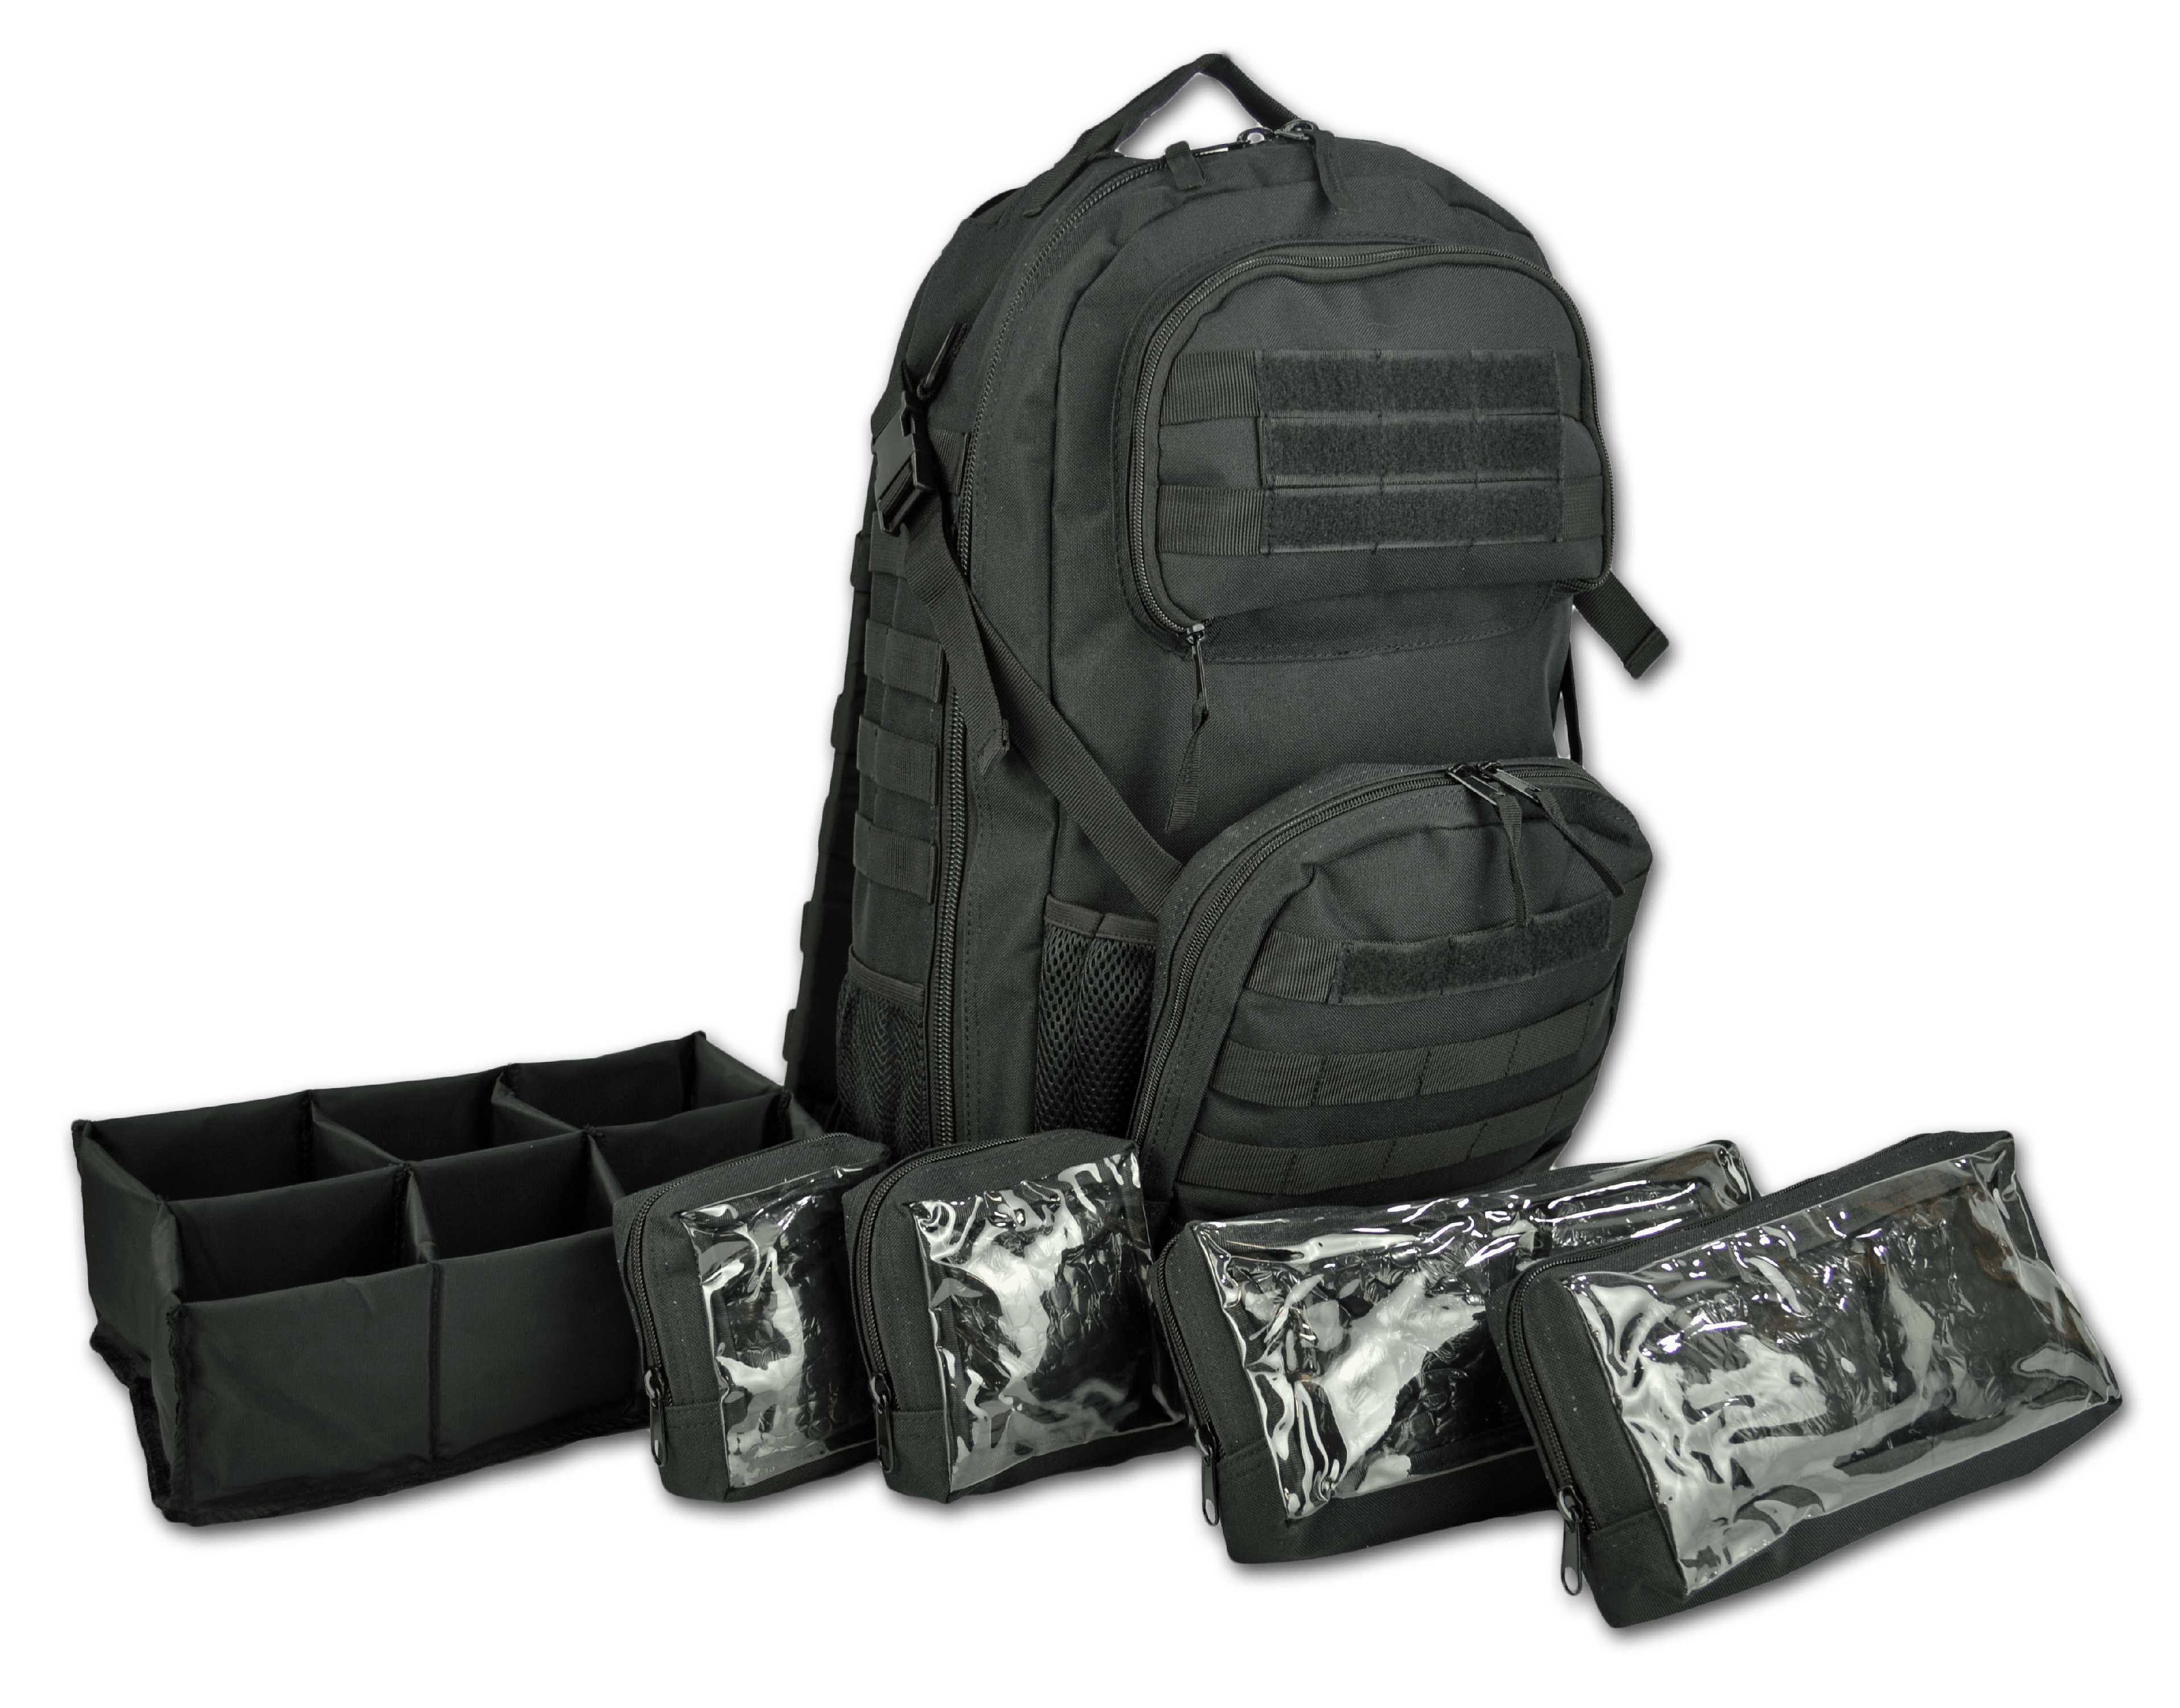 Lightning X Premium Tactical Medic Backpack w/ Modular Pouches & Hydration Port - image 1 of 3